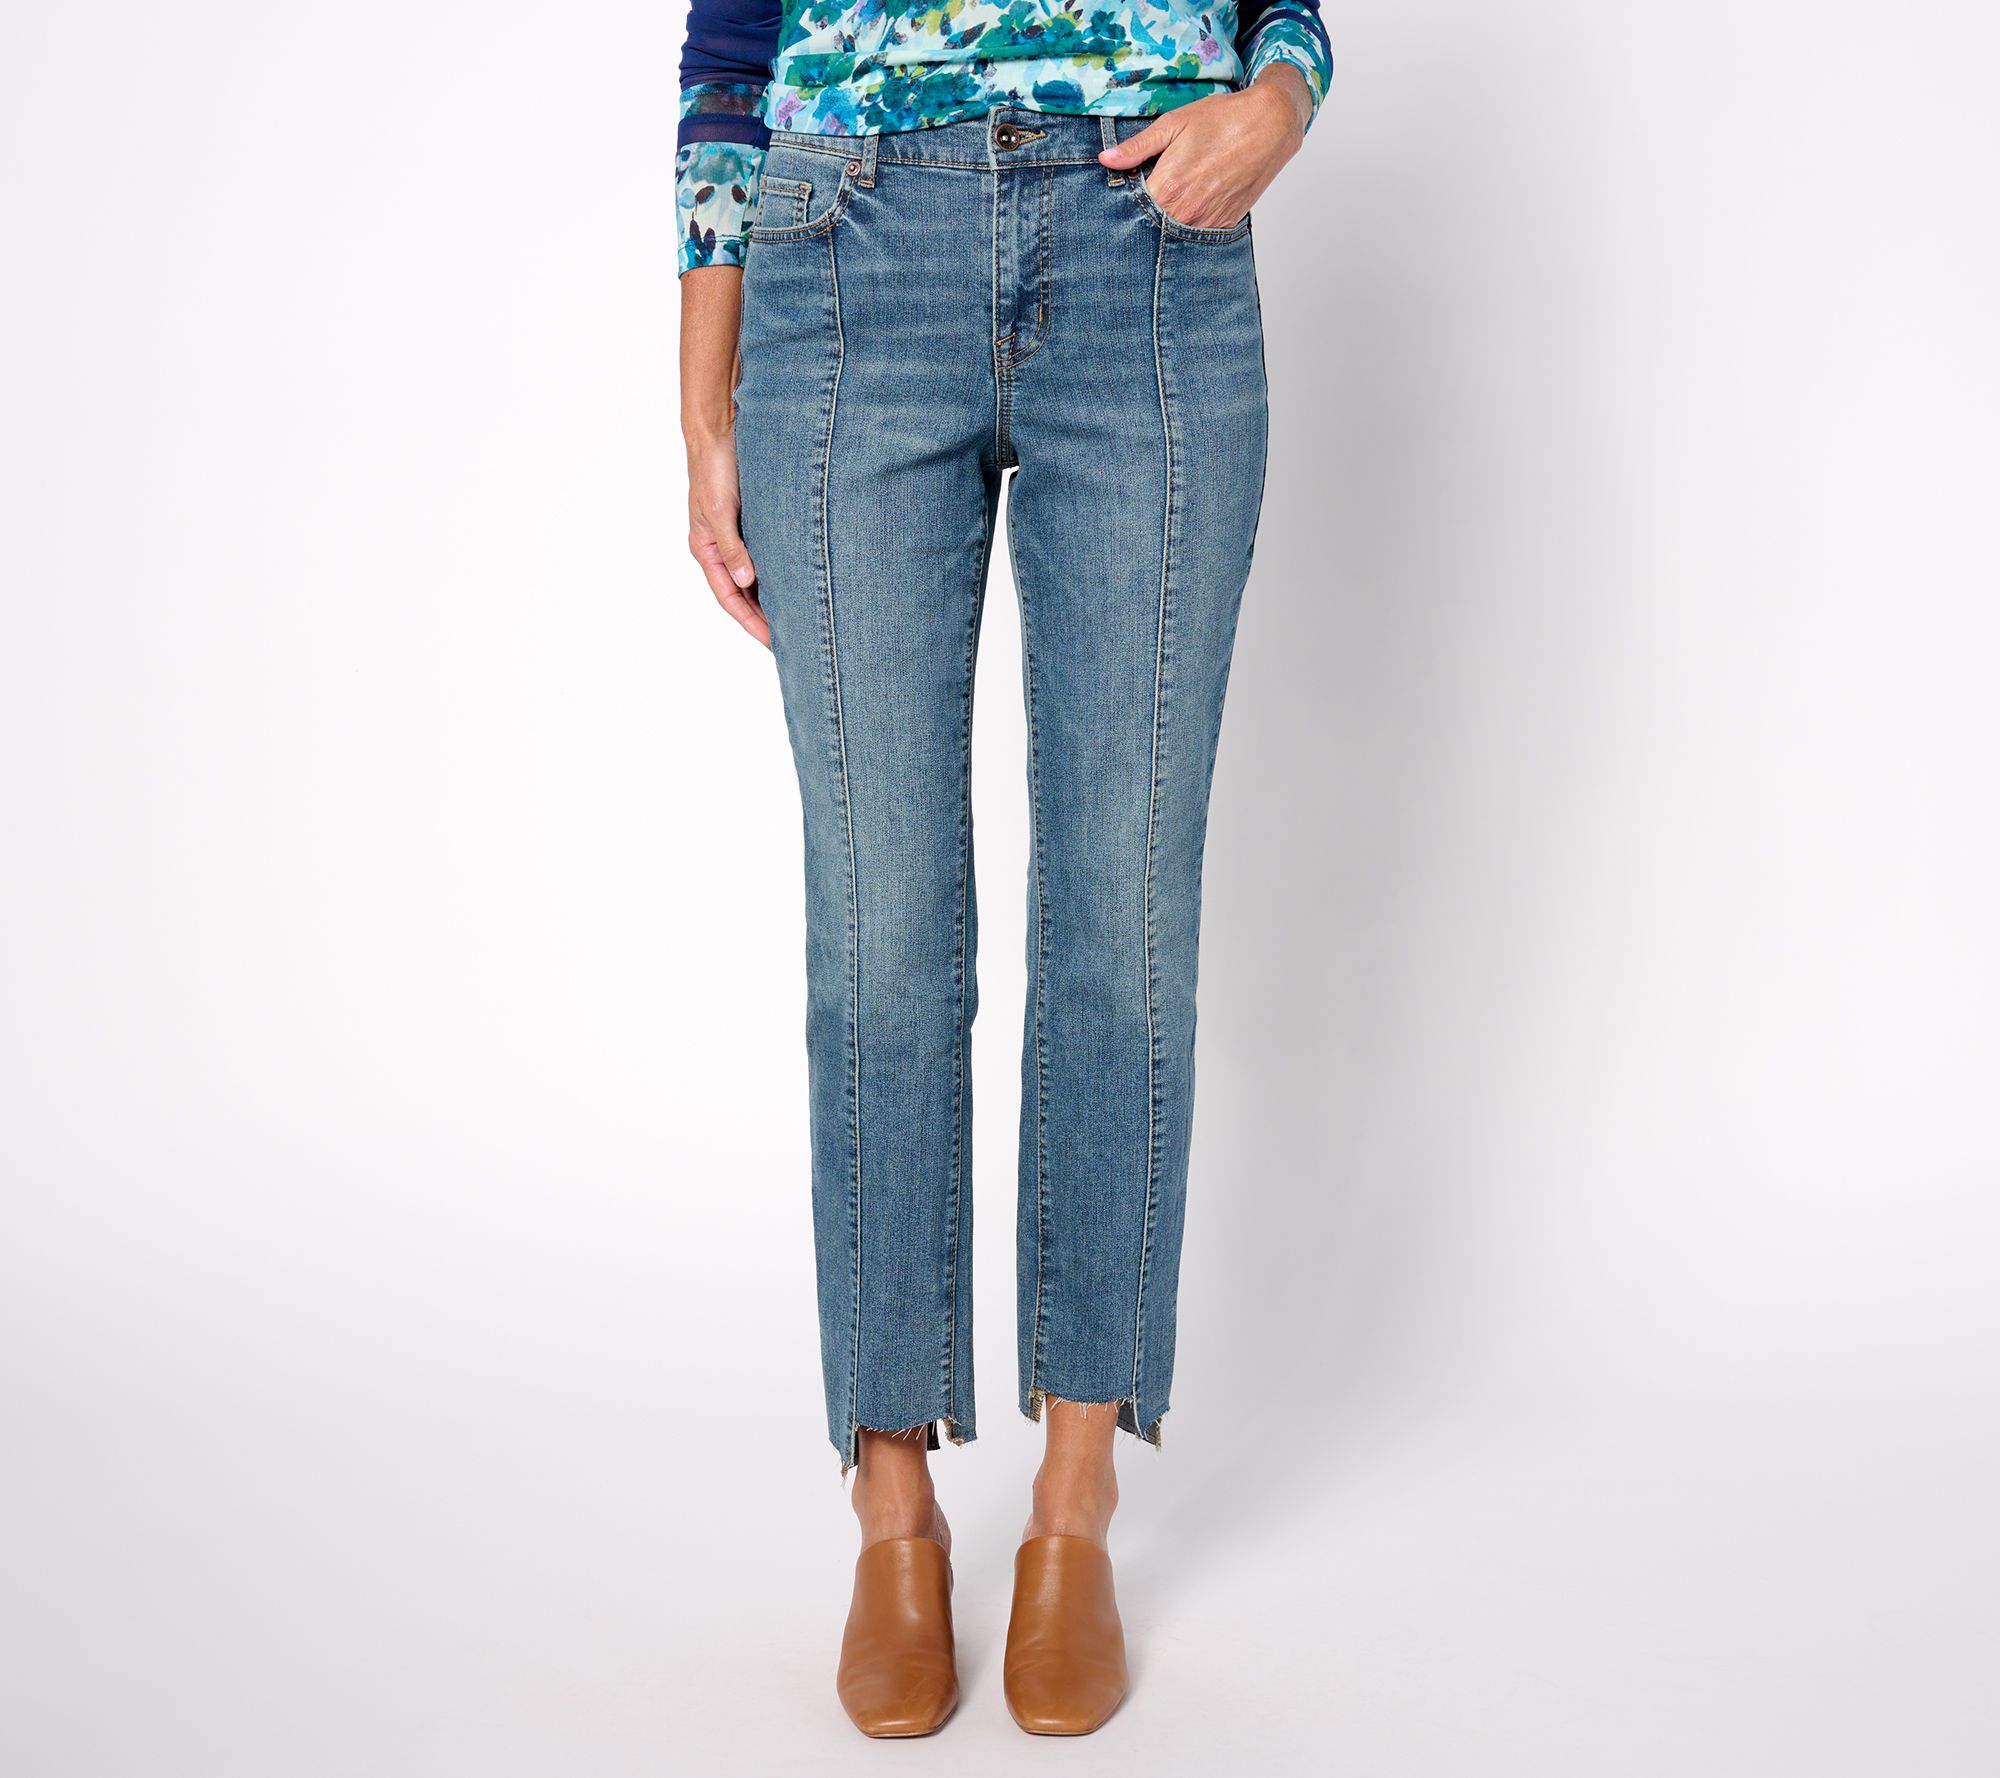 Tall Misses Small (6-8) - Jeans - Ankle Pants 